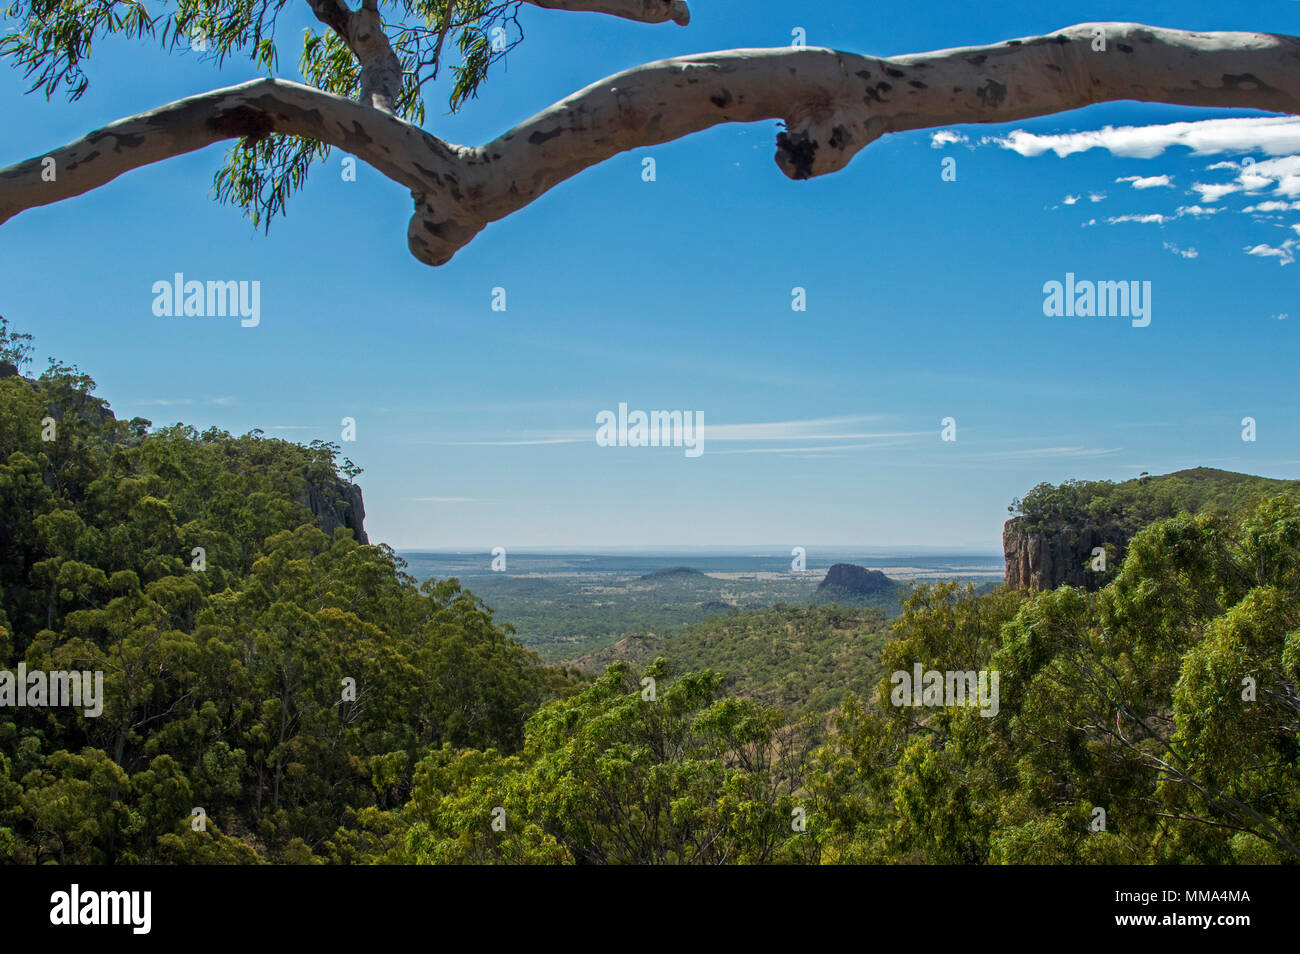 View of vast plains, gorge & forested hills under blue sky from lookout at Fred's gorge in Minerva Hills National Park, near Springsure Qld. Australia Stock Photo